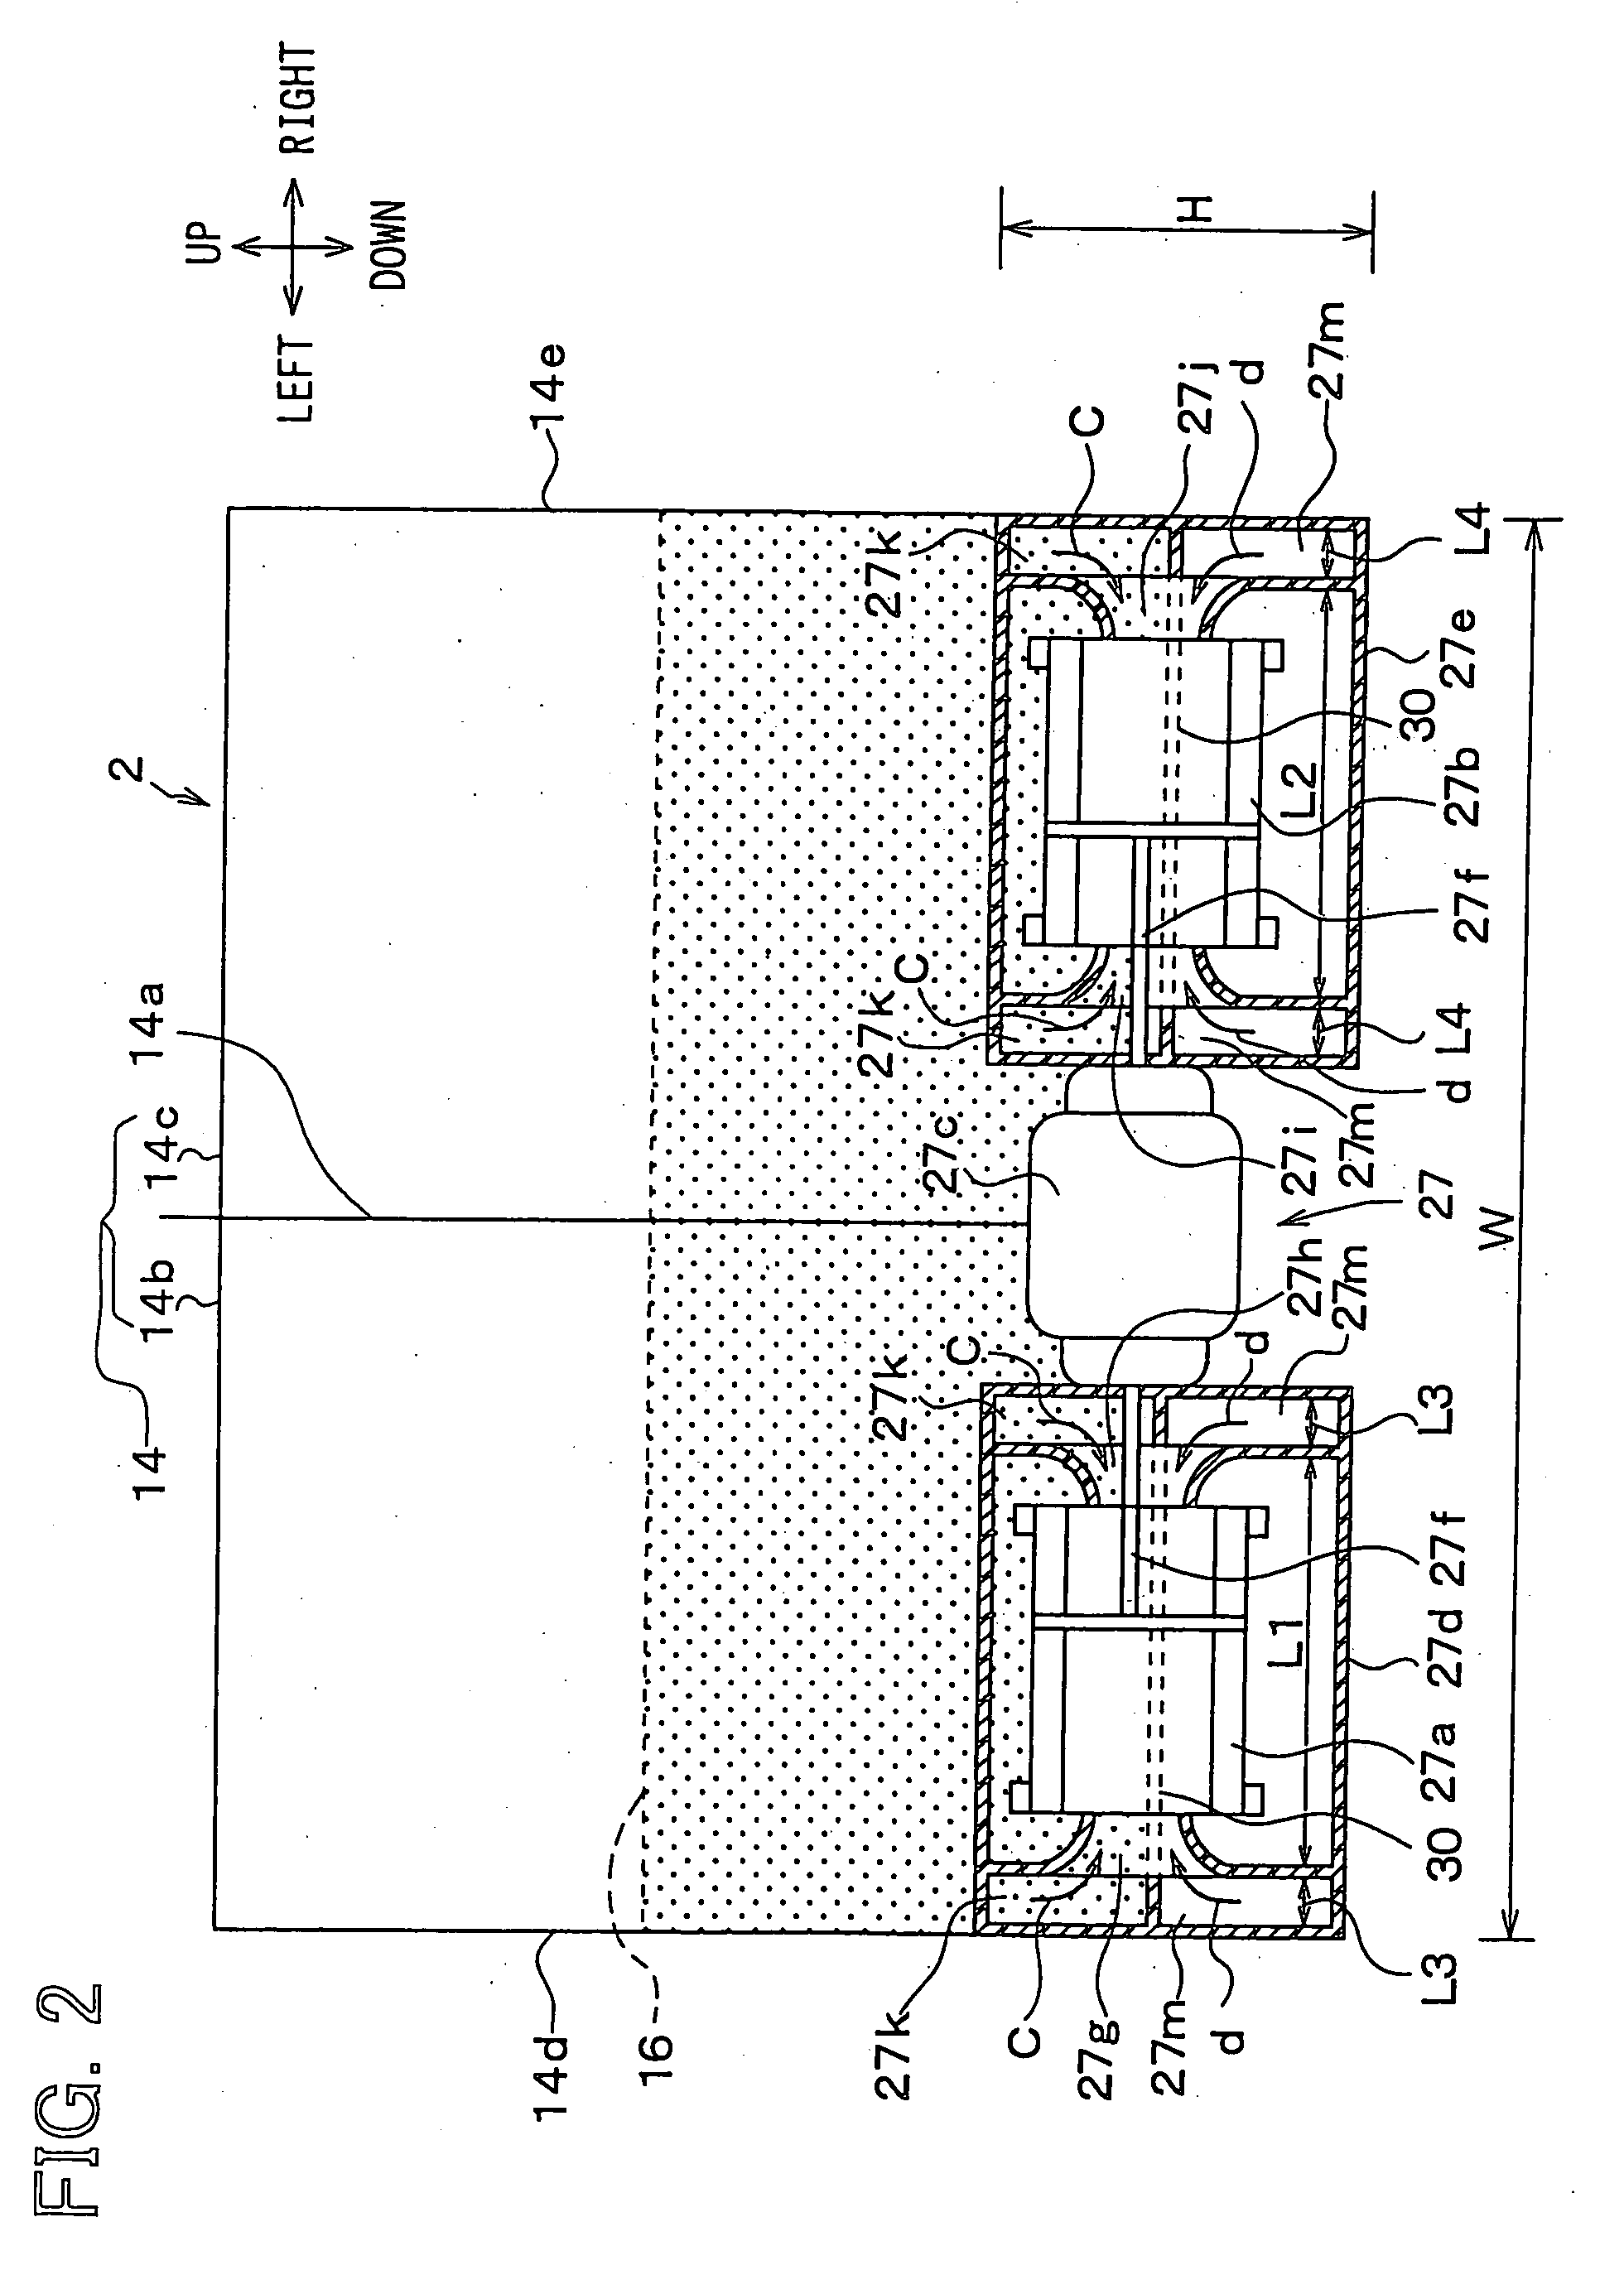 Vehicle air conditioner with automatic control of main blower and sub-blower